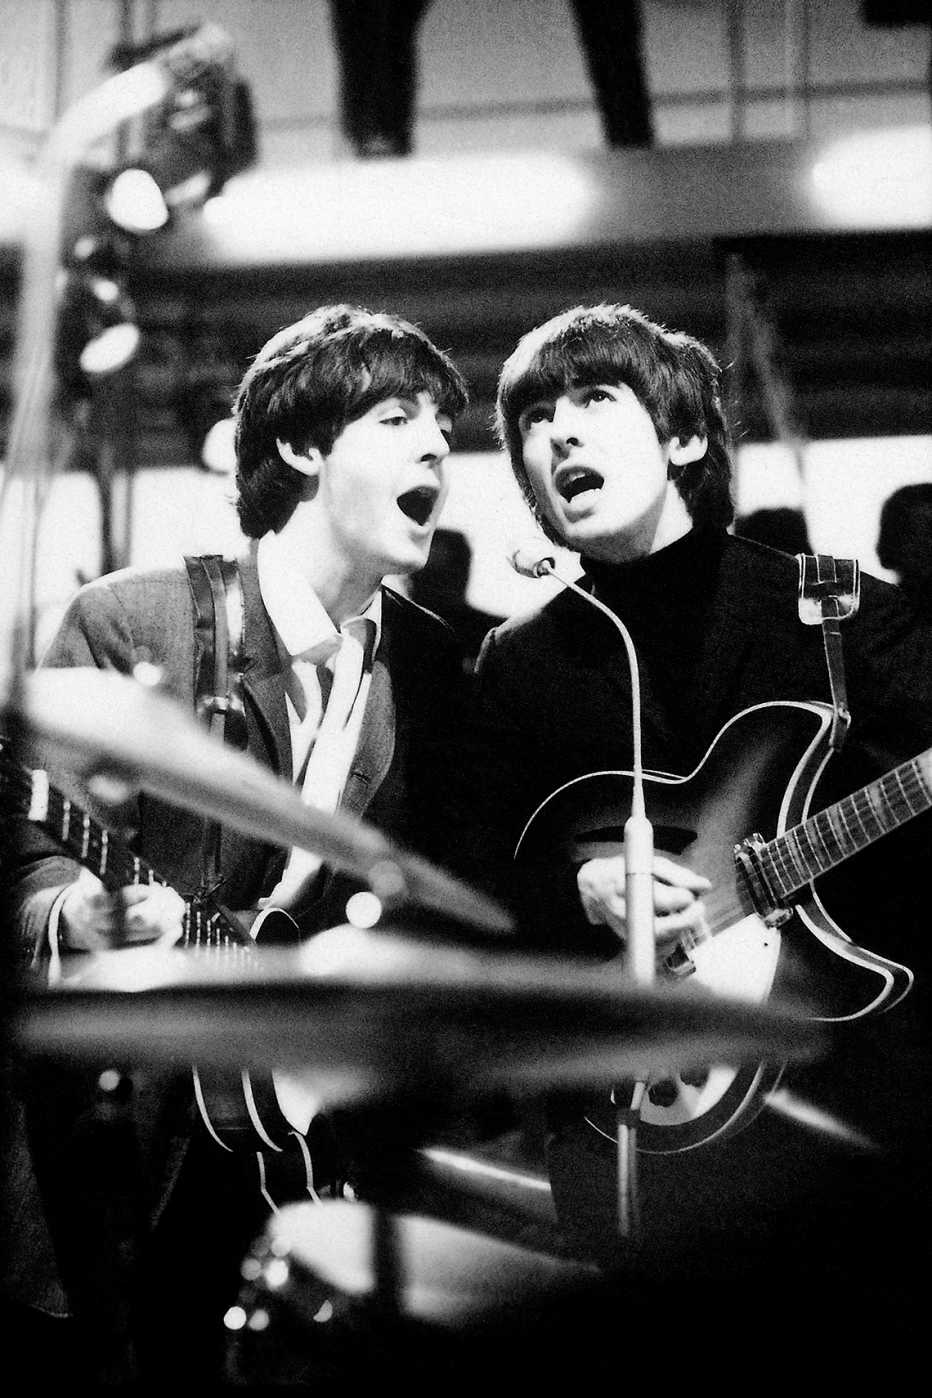 Paul McCartney and John Lennon sing into a shared microphone during the Beatles rehearsal for a television special at Wembley Studios